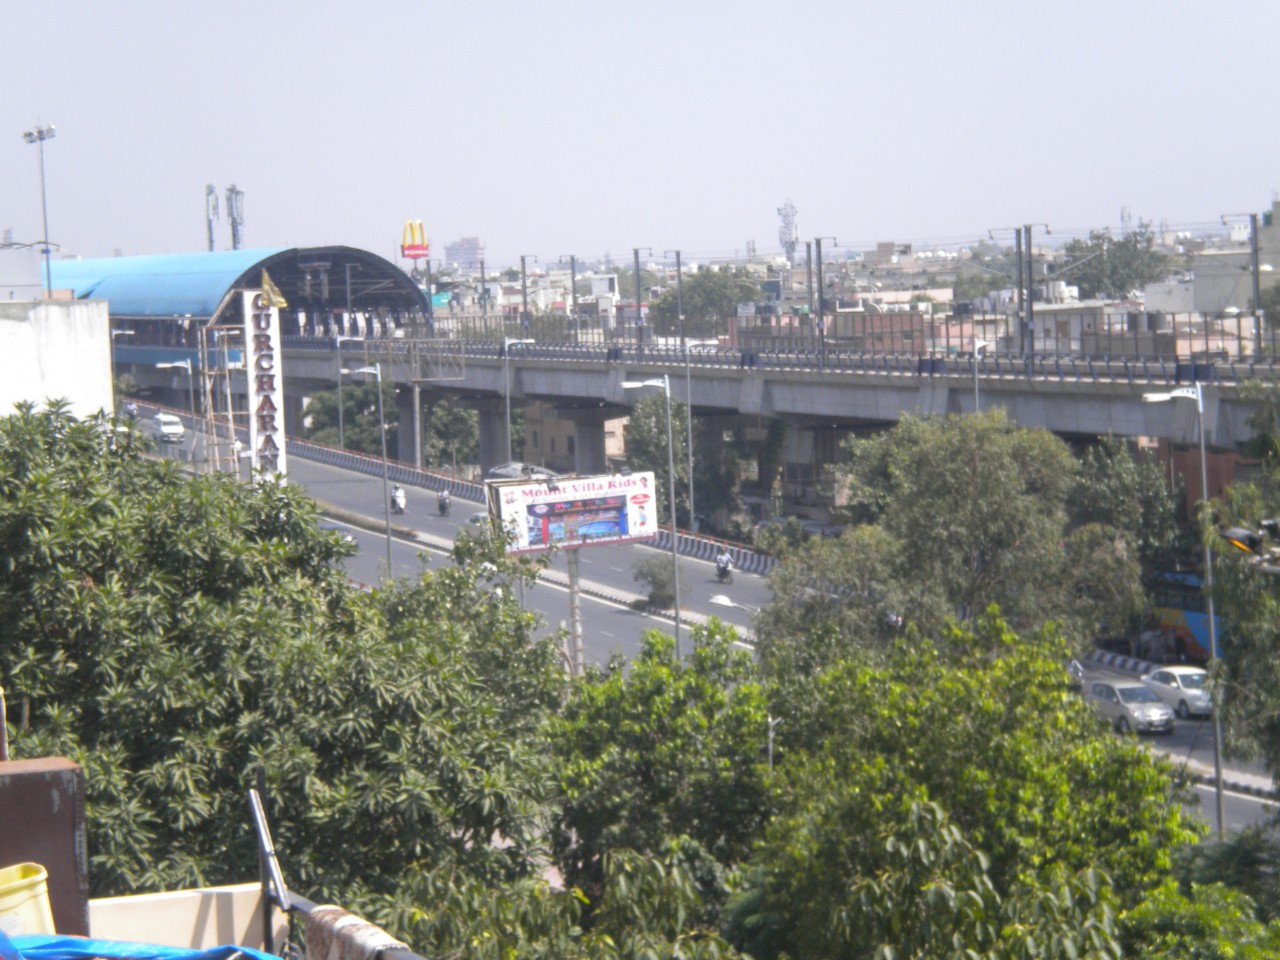 DDA to remodel areas near metro stations